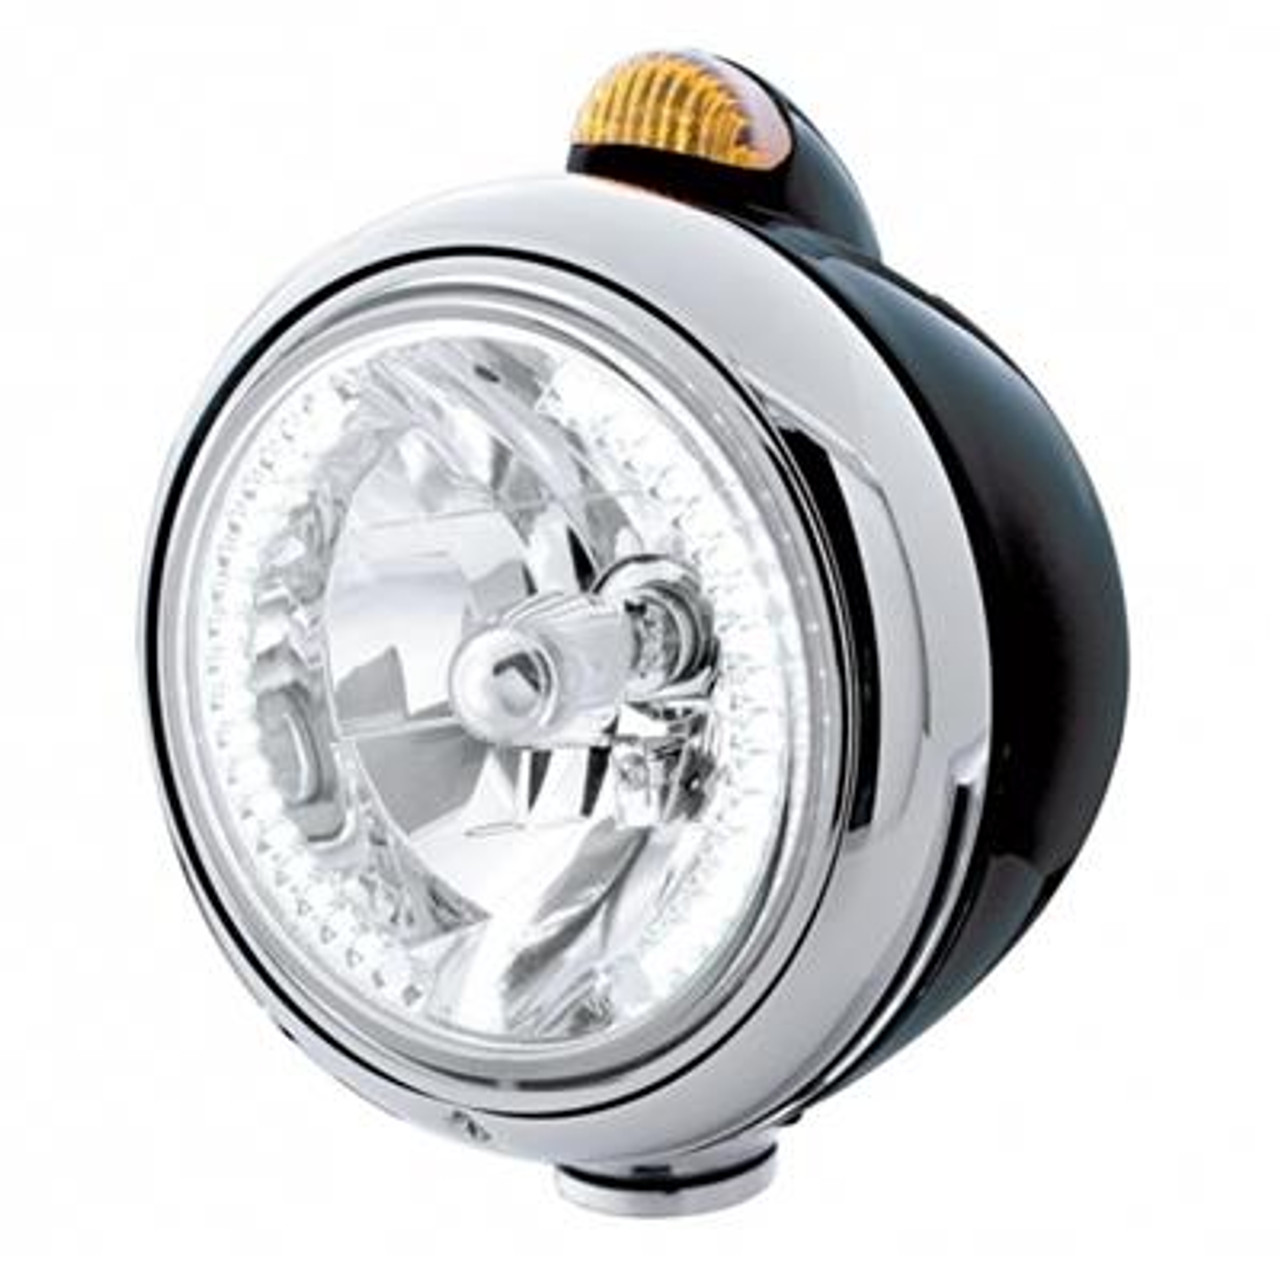 As one of the largest manufacturers of aftermarket headlights and accessories, United Pacific is here to provide nothing but the best components. From full headlight assemblies, bulbs, turn signals, to visors and shields, UP has everything you need.